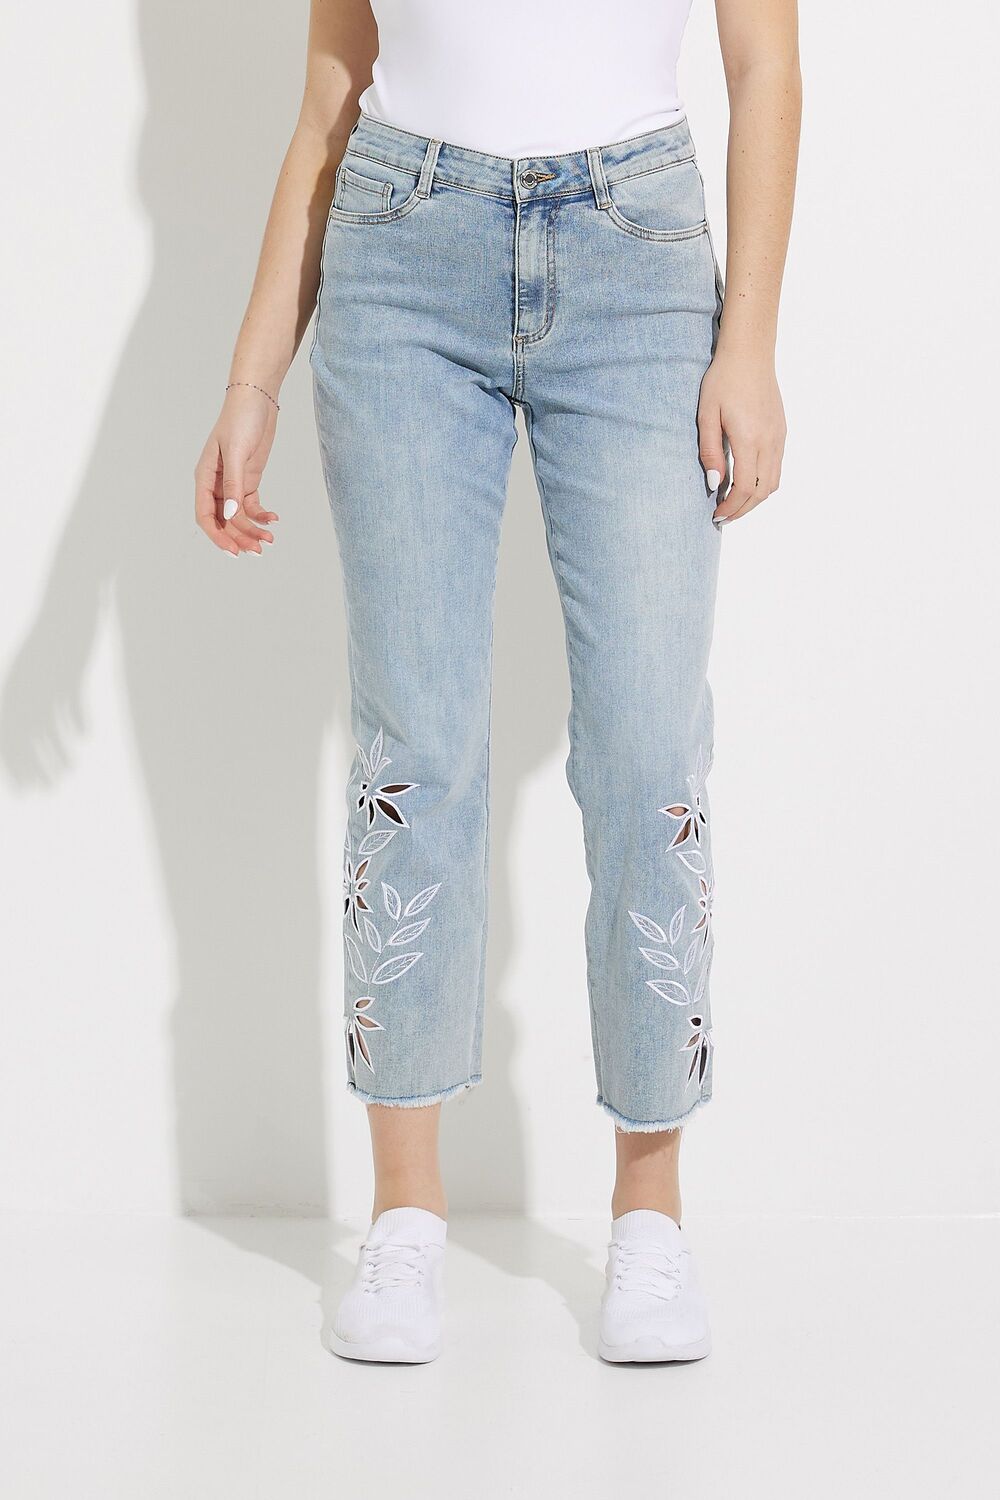 Embroidered Detail Jeans Style 232914. Light Blue